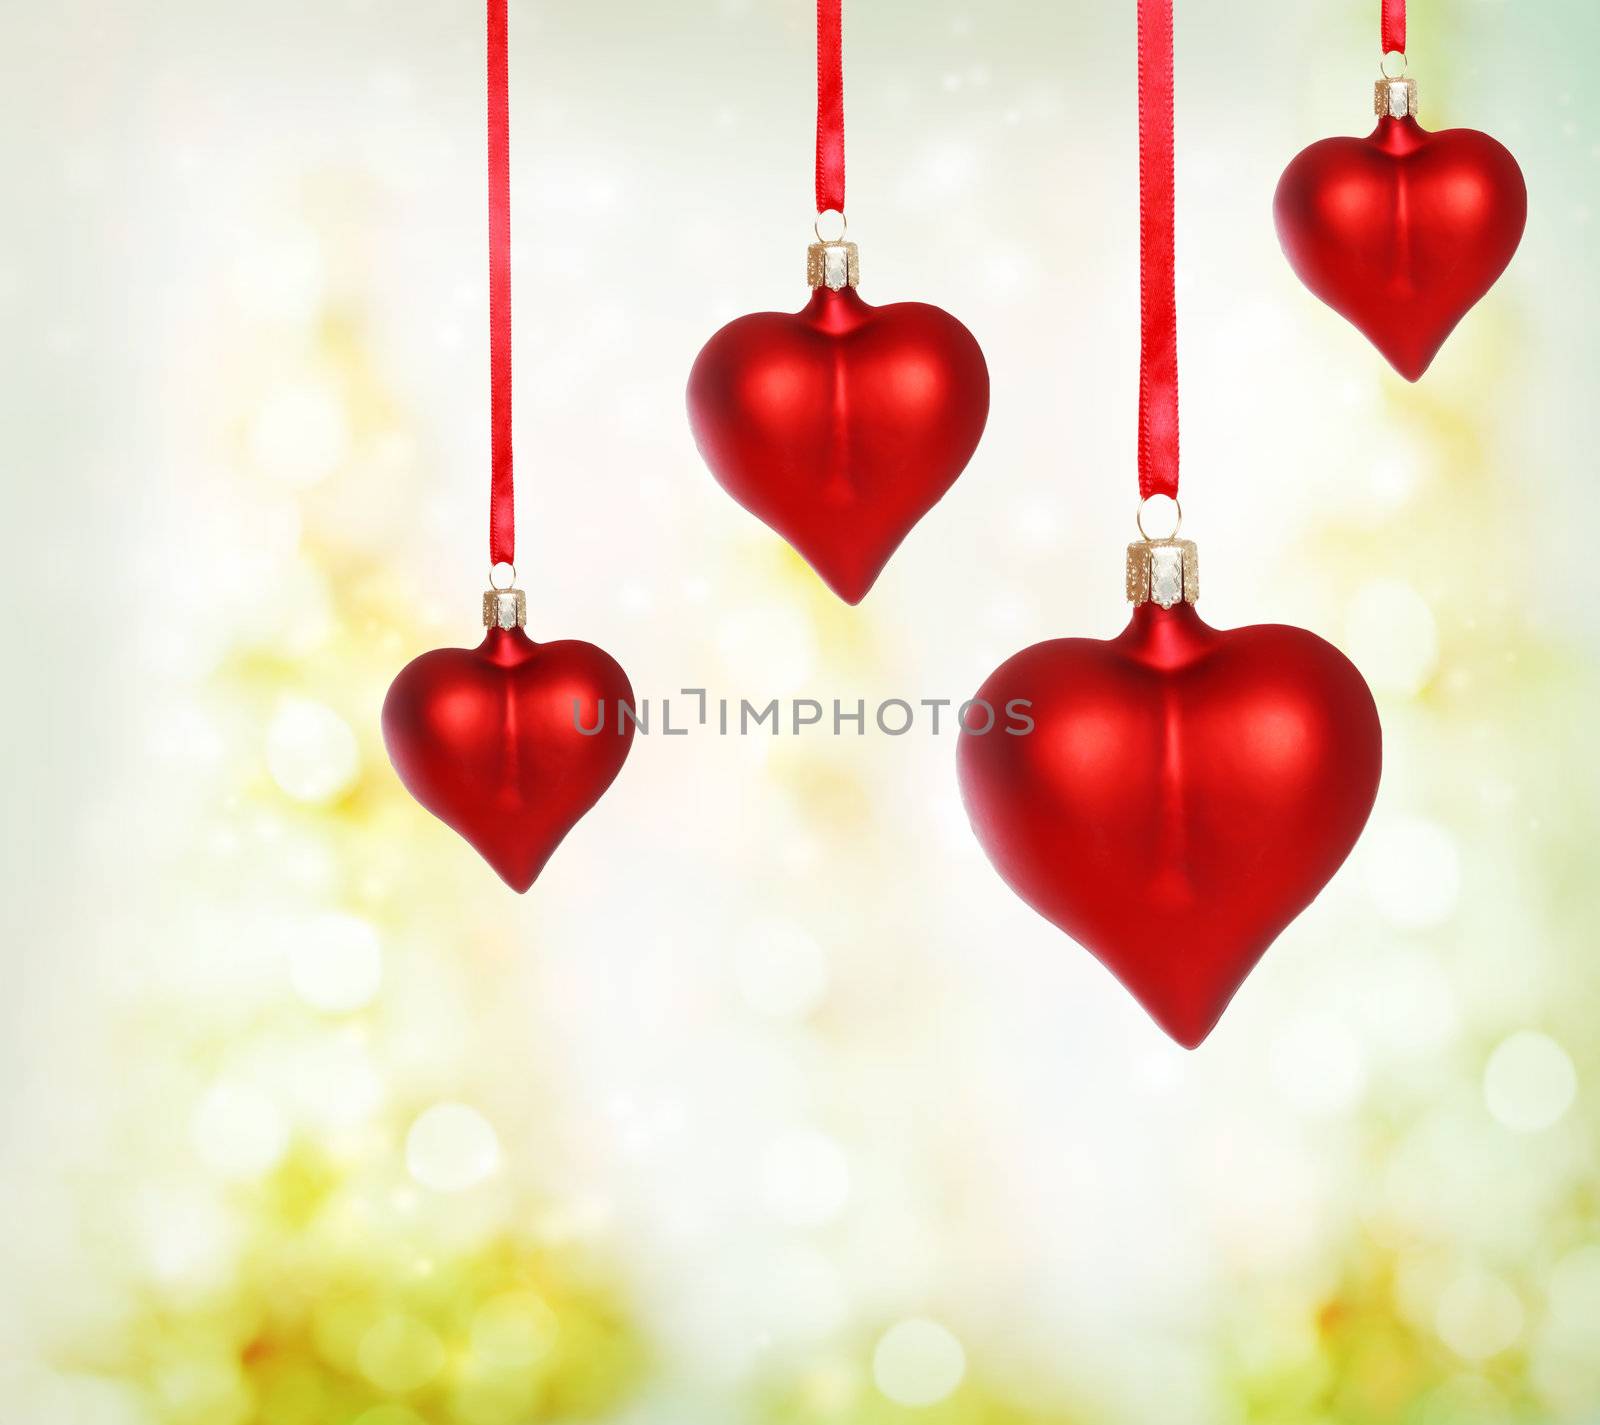 Valentine heart ornaments with abstract light background